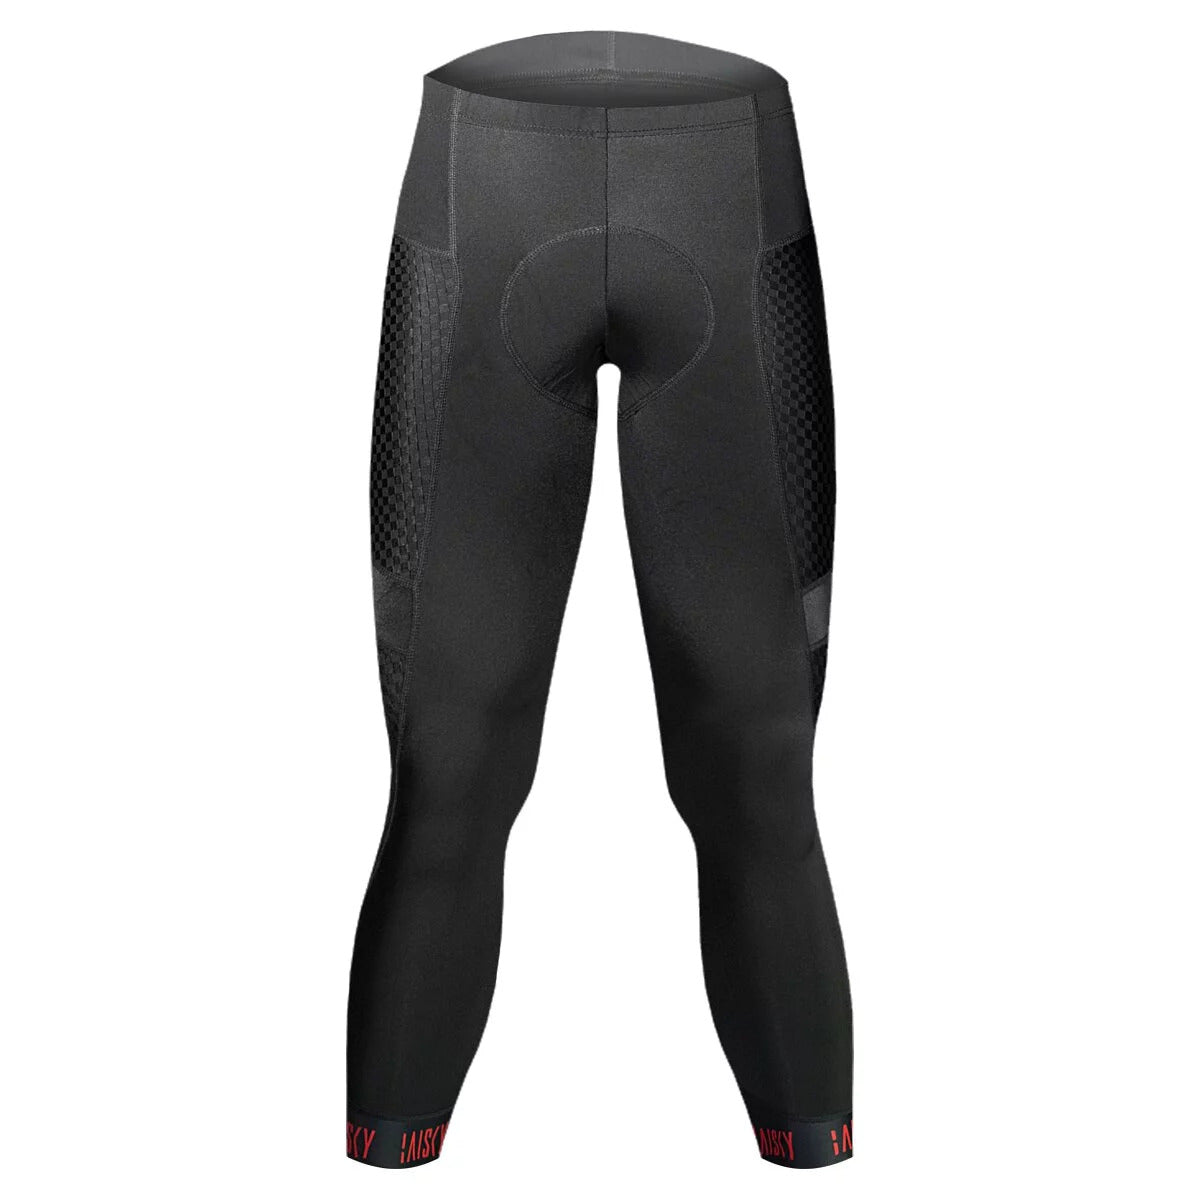 Baisky Mens Endurance Cropped tights with Vion Insert Pads - Windblown Black - Cyclop.in